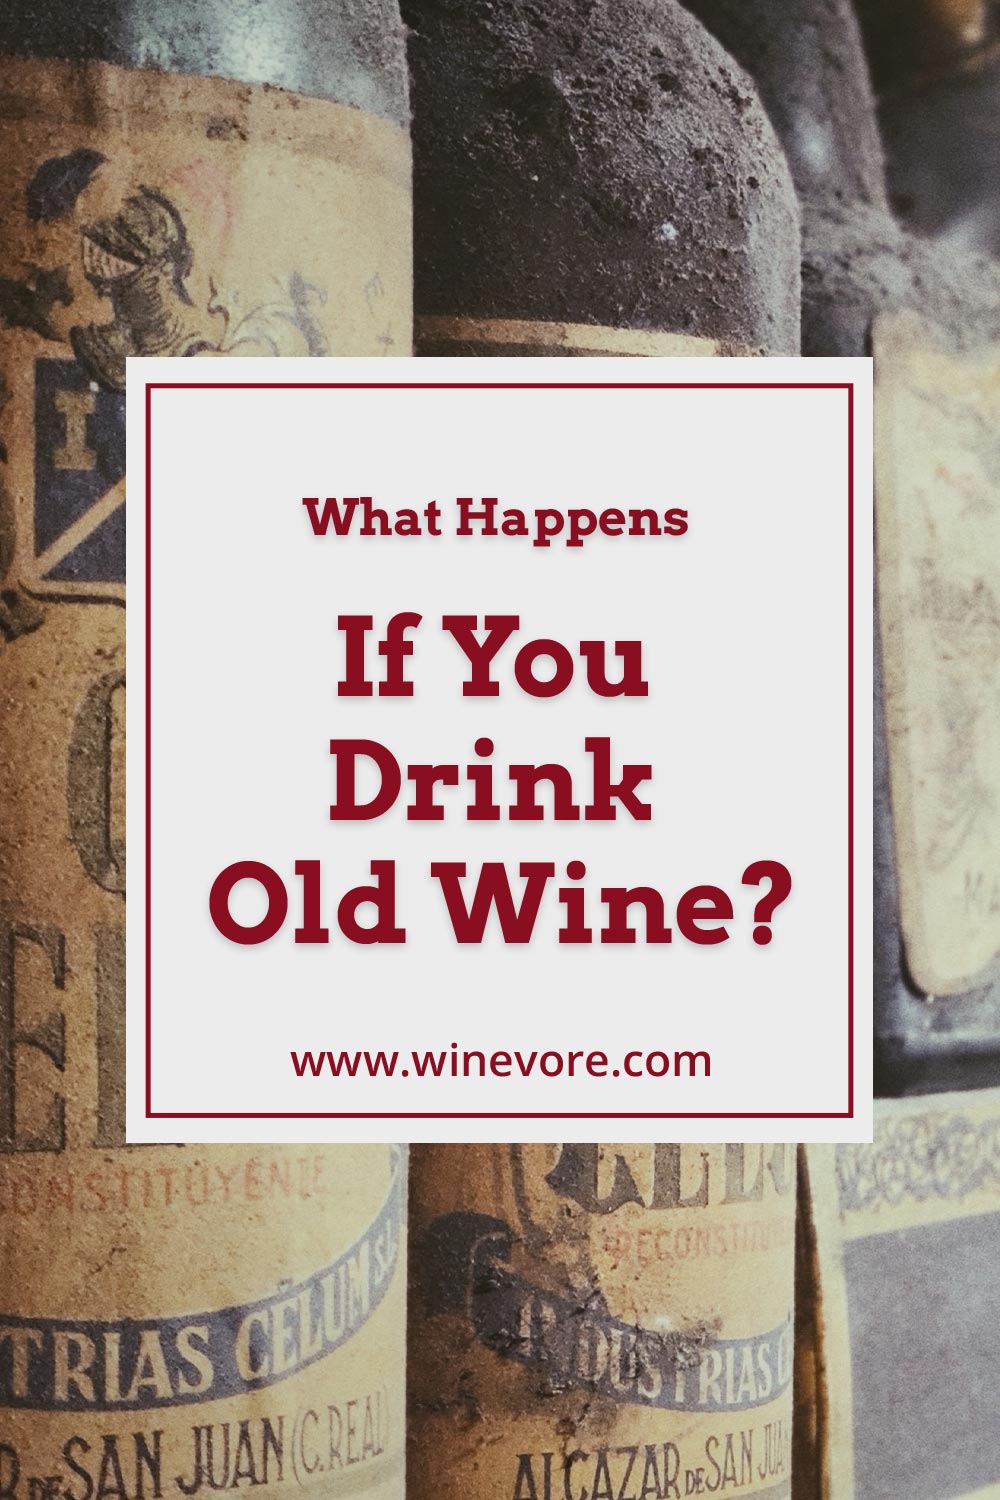 Old and dusty wine bottles - What Happens If You Drink Old Wine?